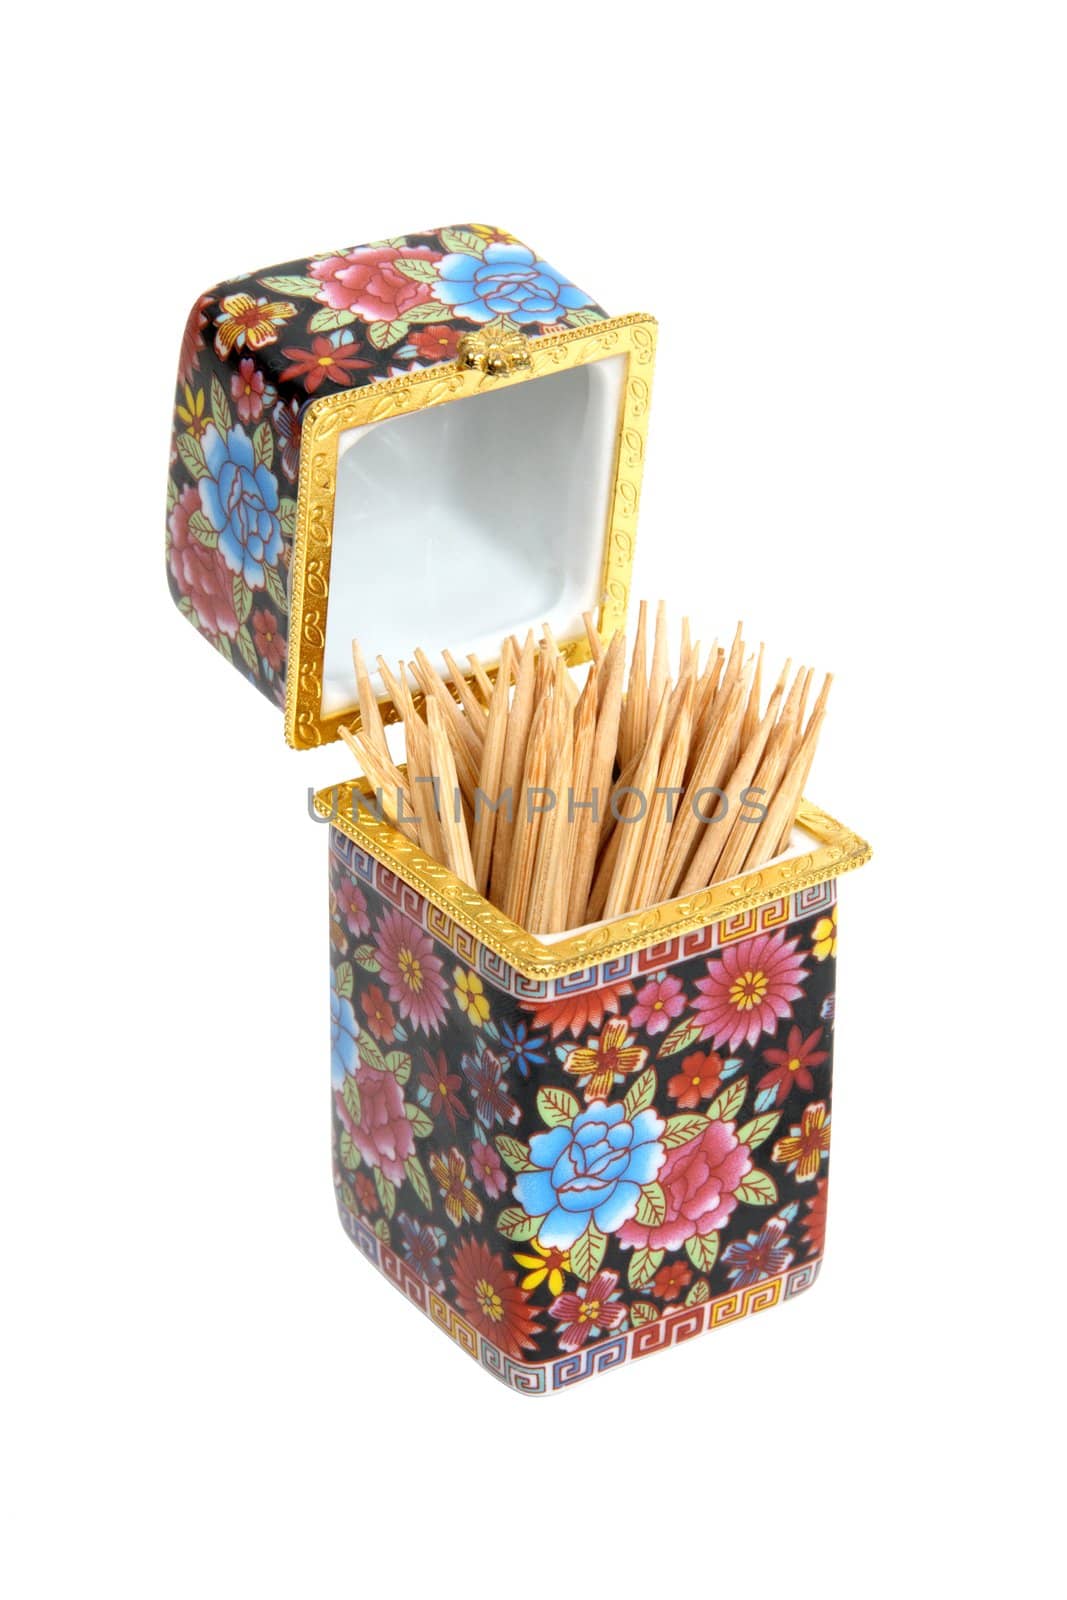 Porcelain toothpick holder decorated with bright colourful flowers, isolated on white background. Clipping path included.